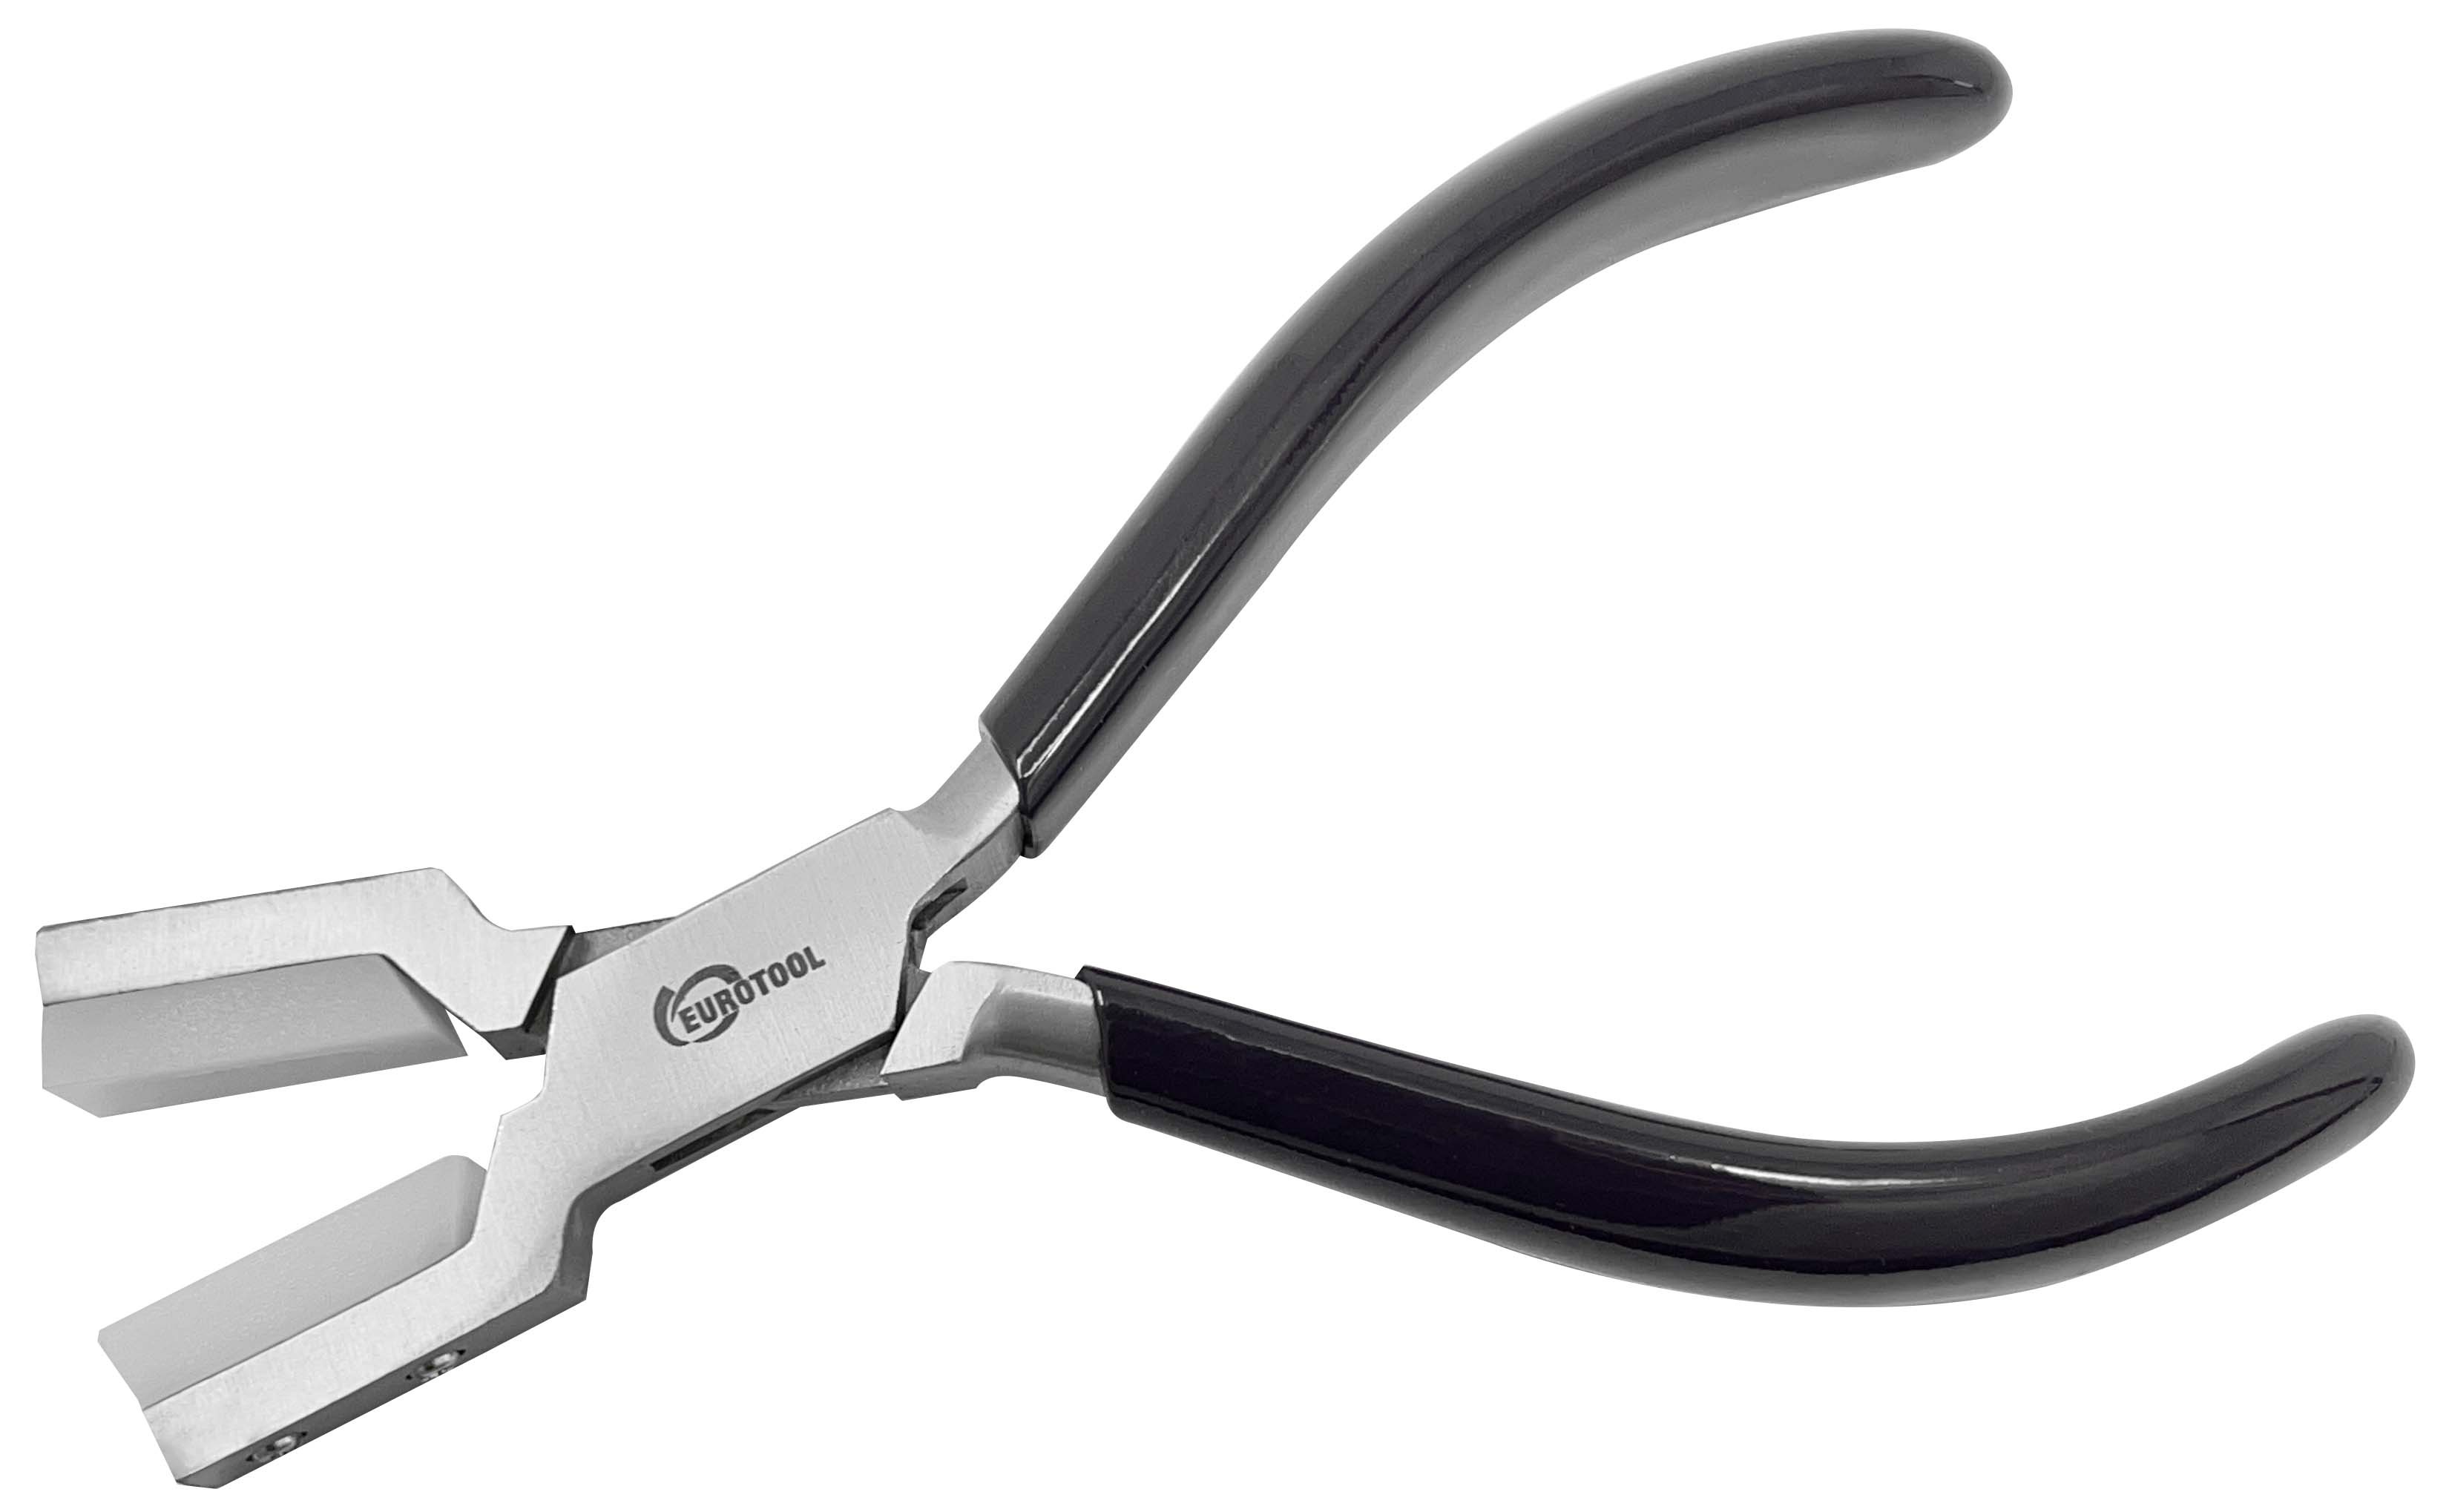 5-1/2" Nylon Jaw Ring Holding Pliers